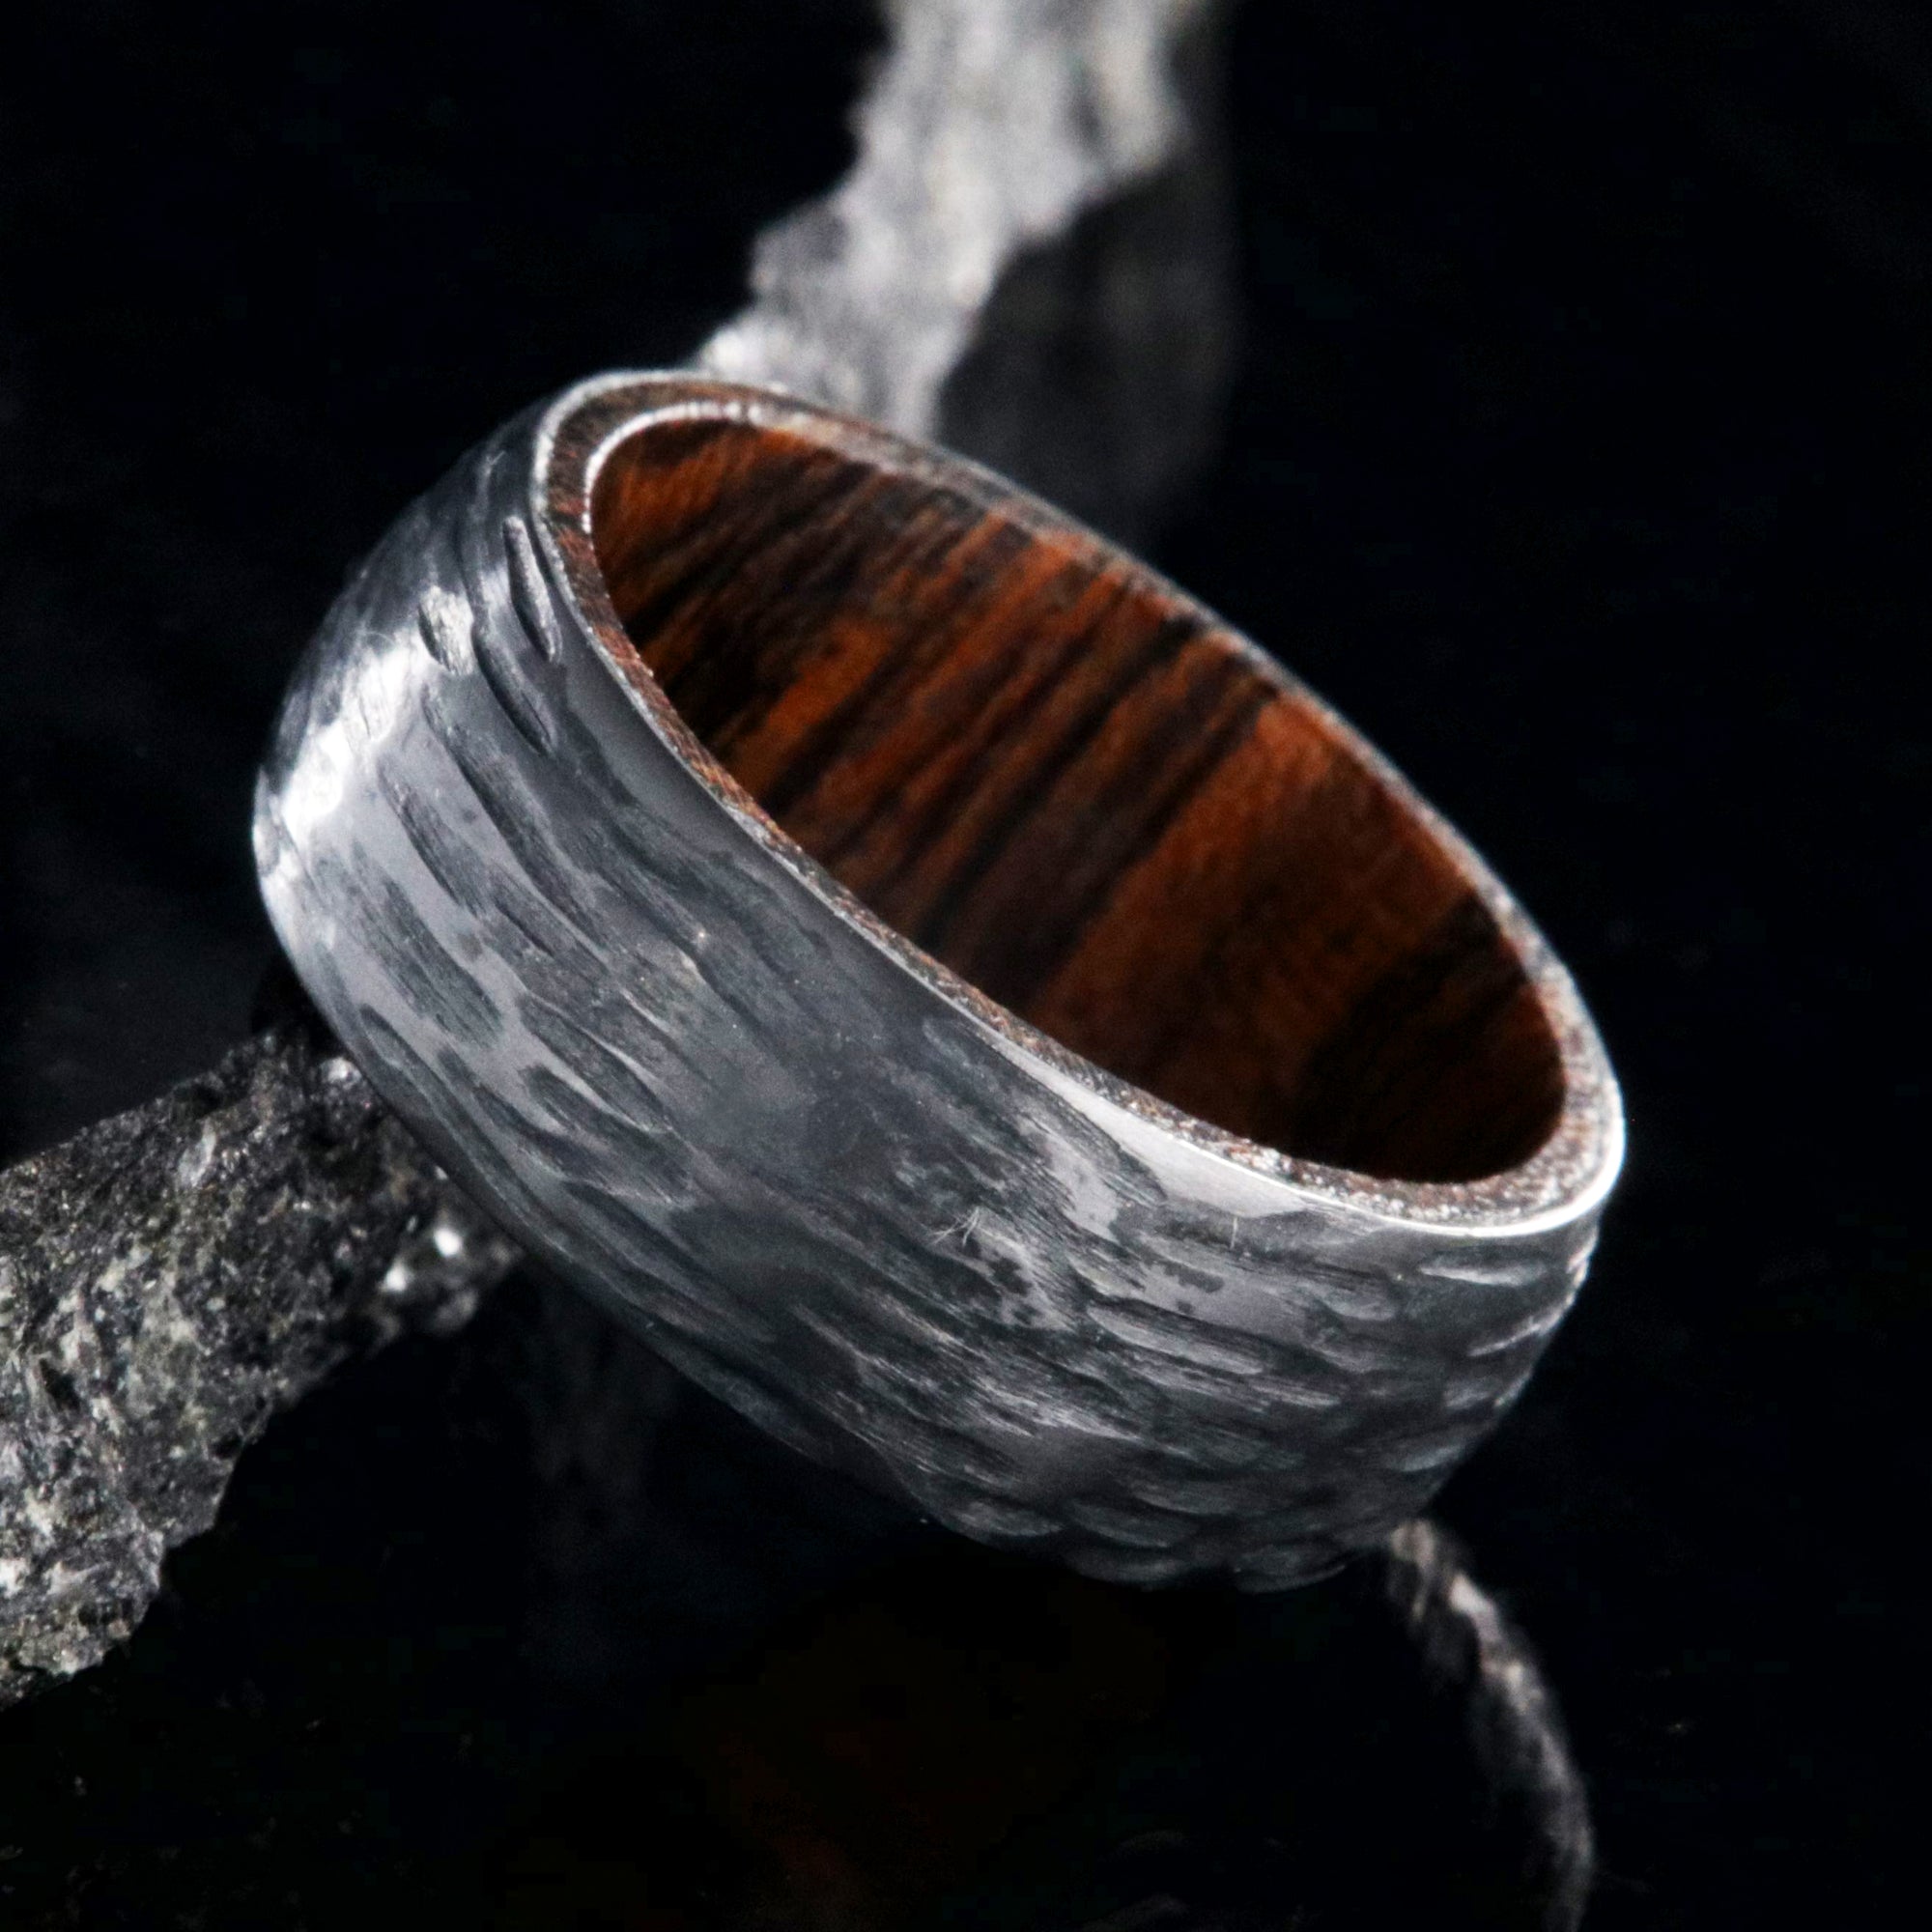 8mm wide black zirconium wedding band with a tree bark finish and bloodwood sleeve